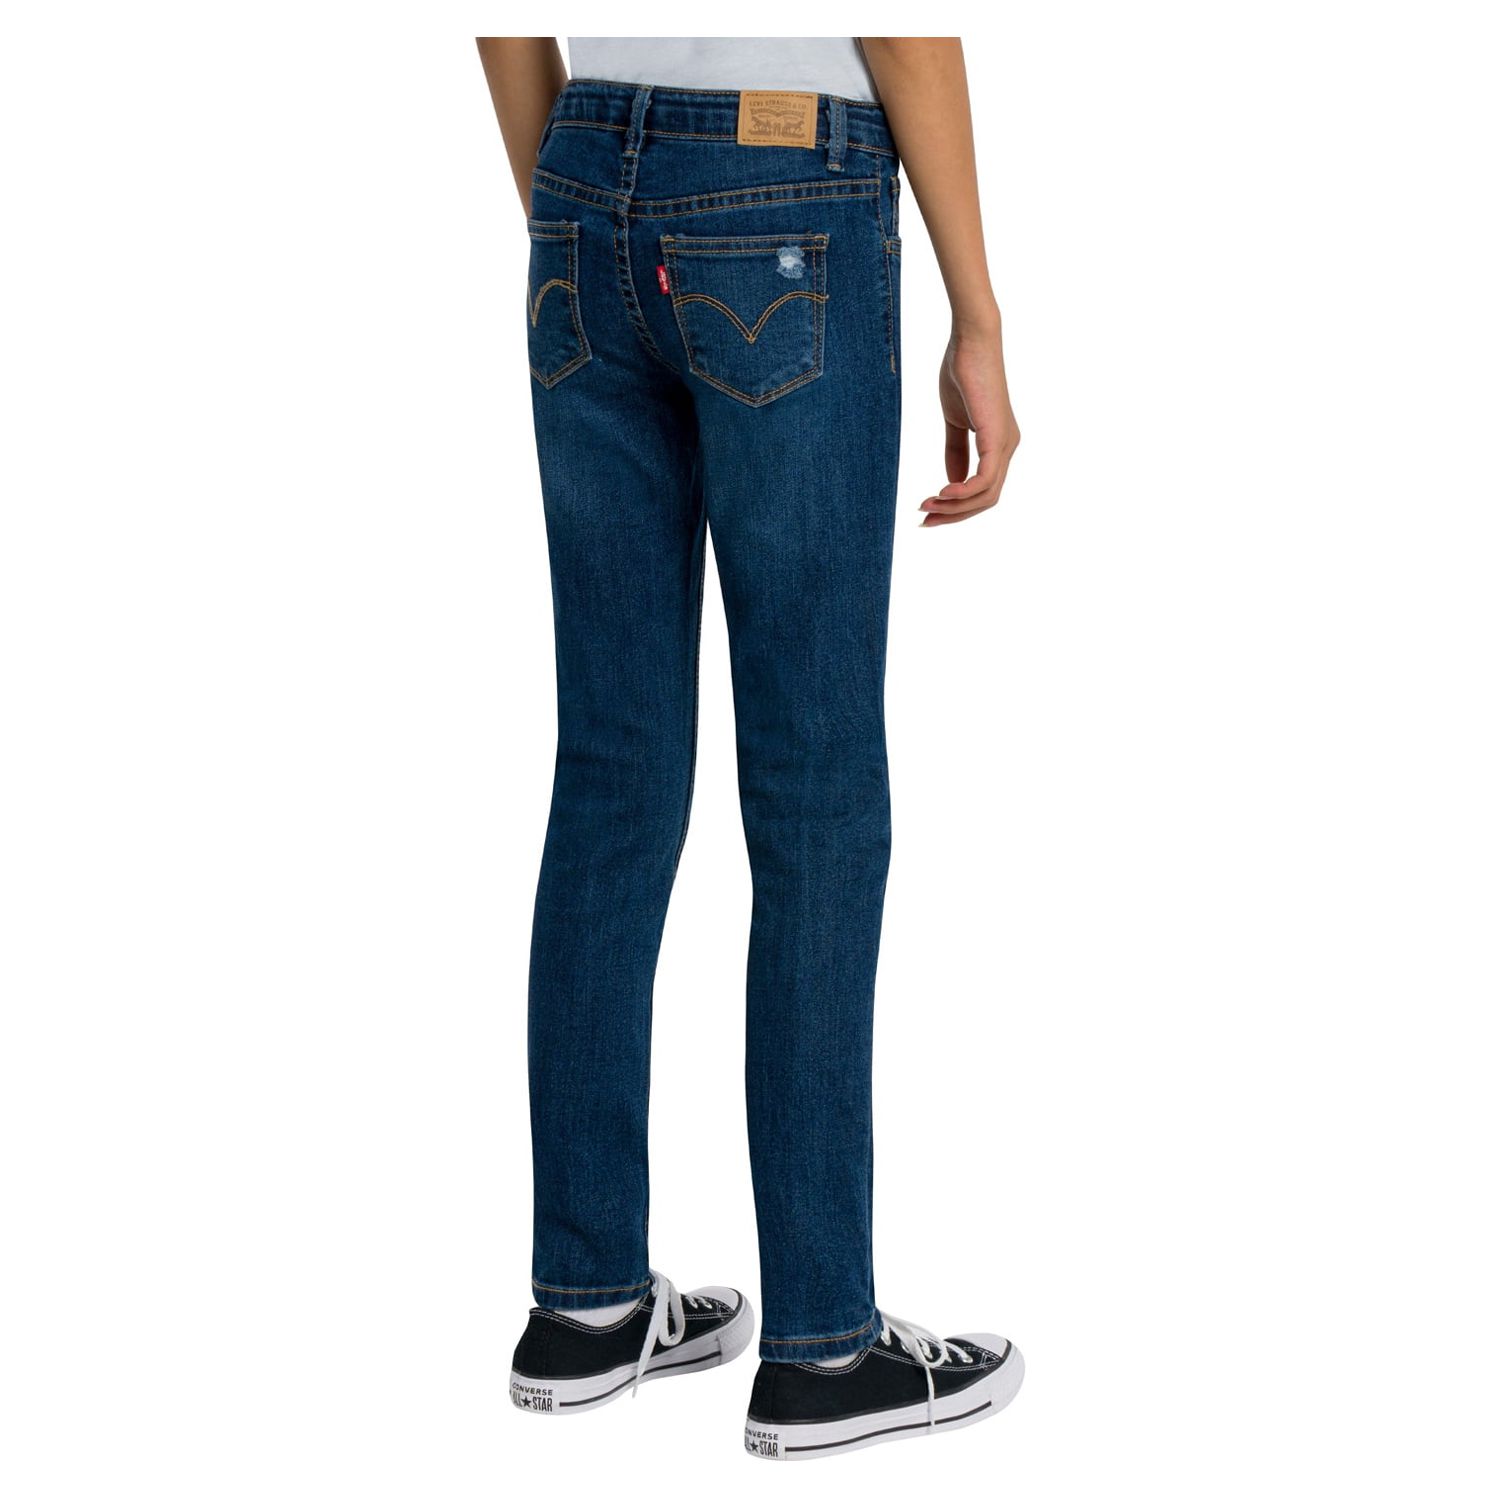 Levi's Girls' 710 Super Skinny Fit Jeans, Sizes 4-16 - image 4 of 6